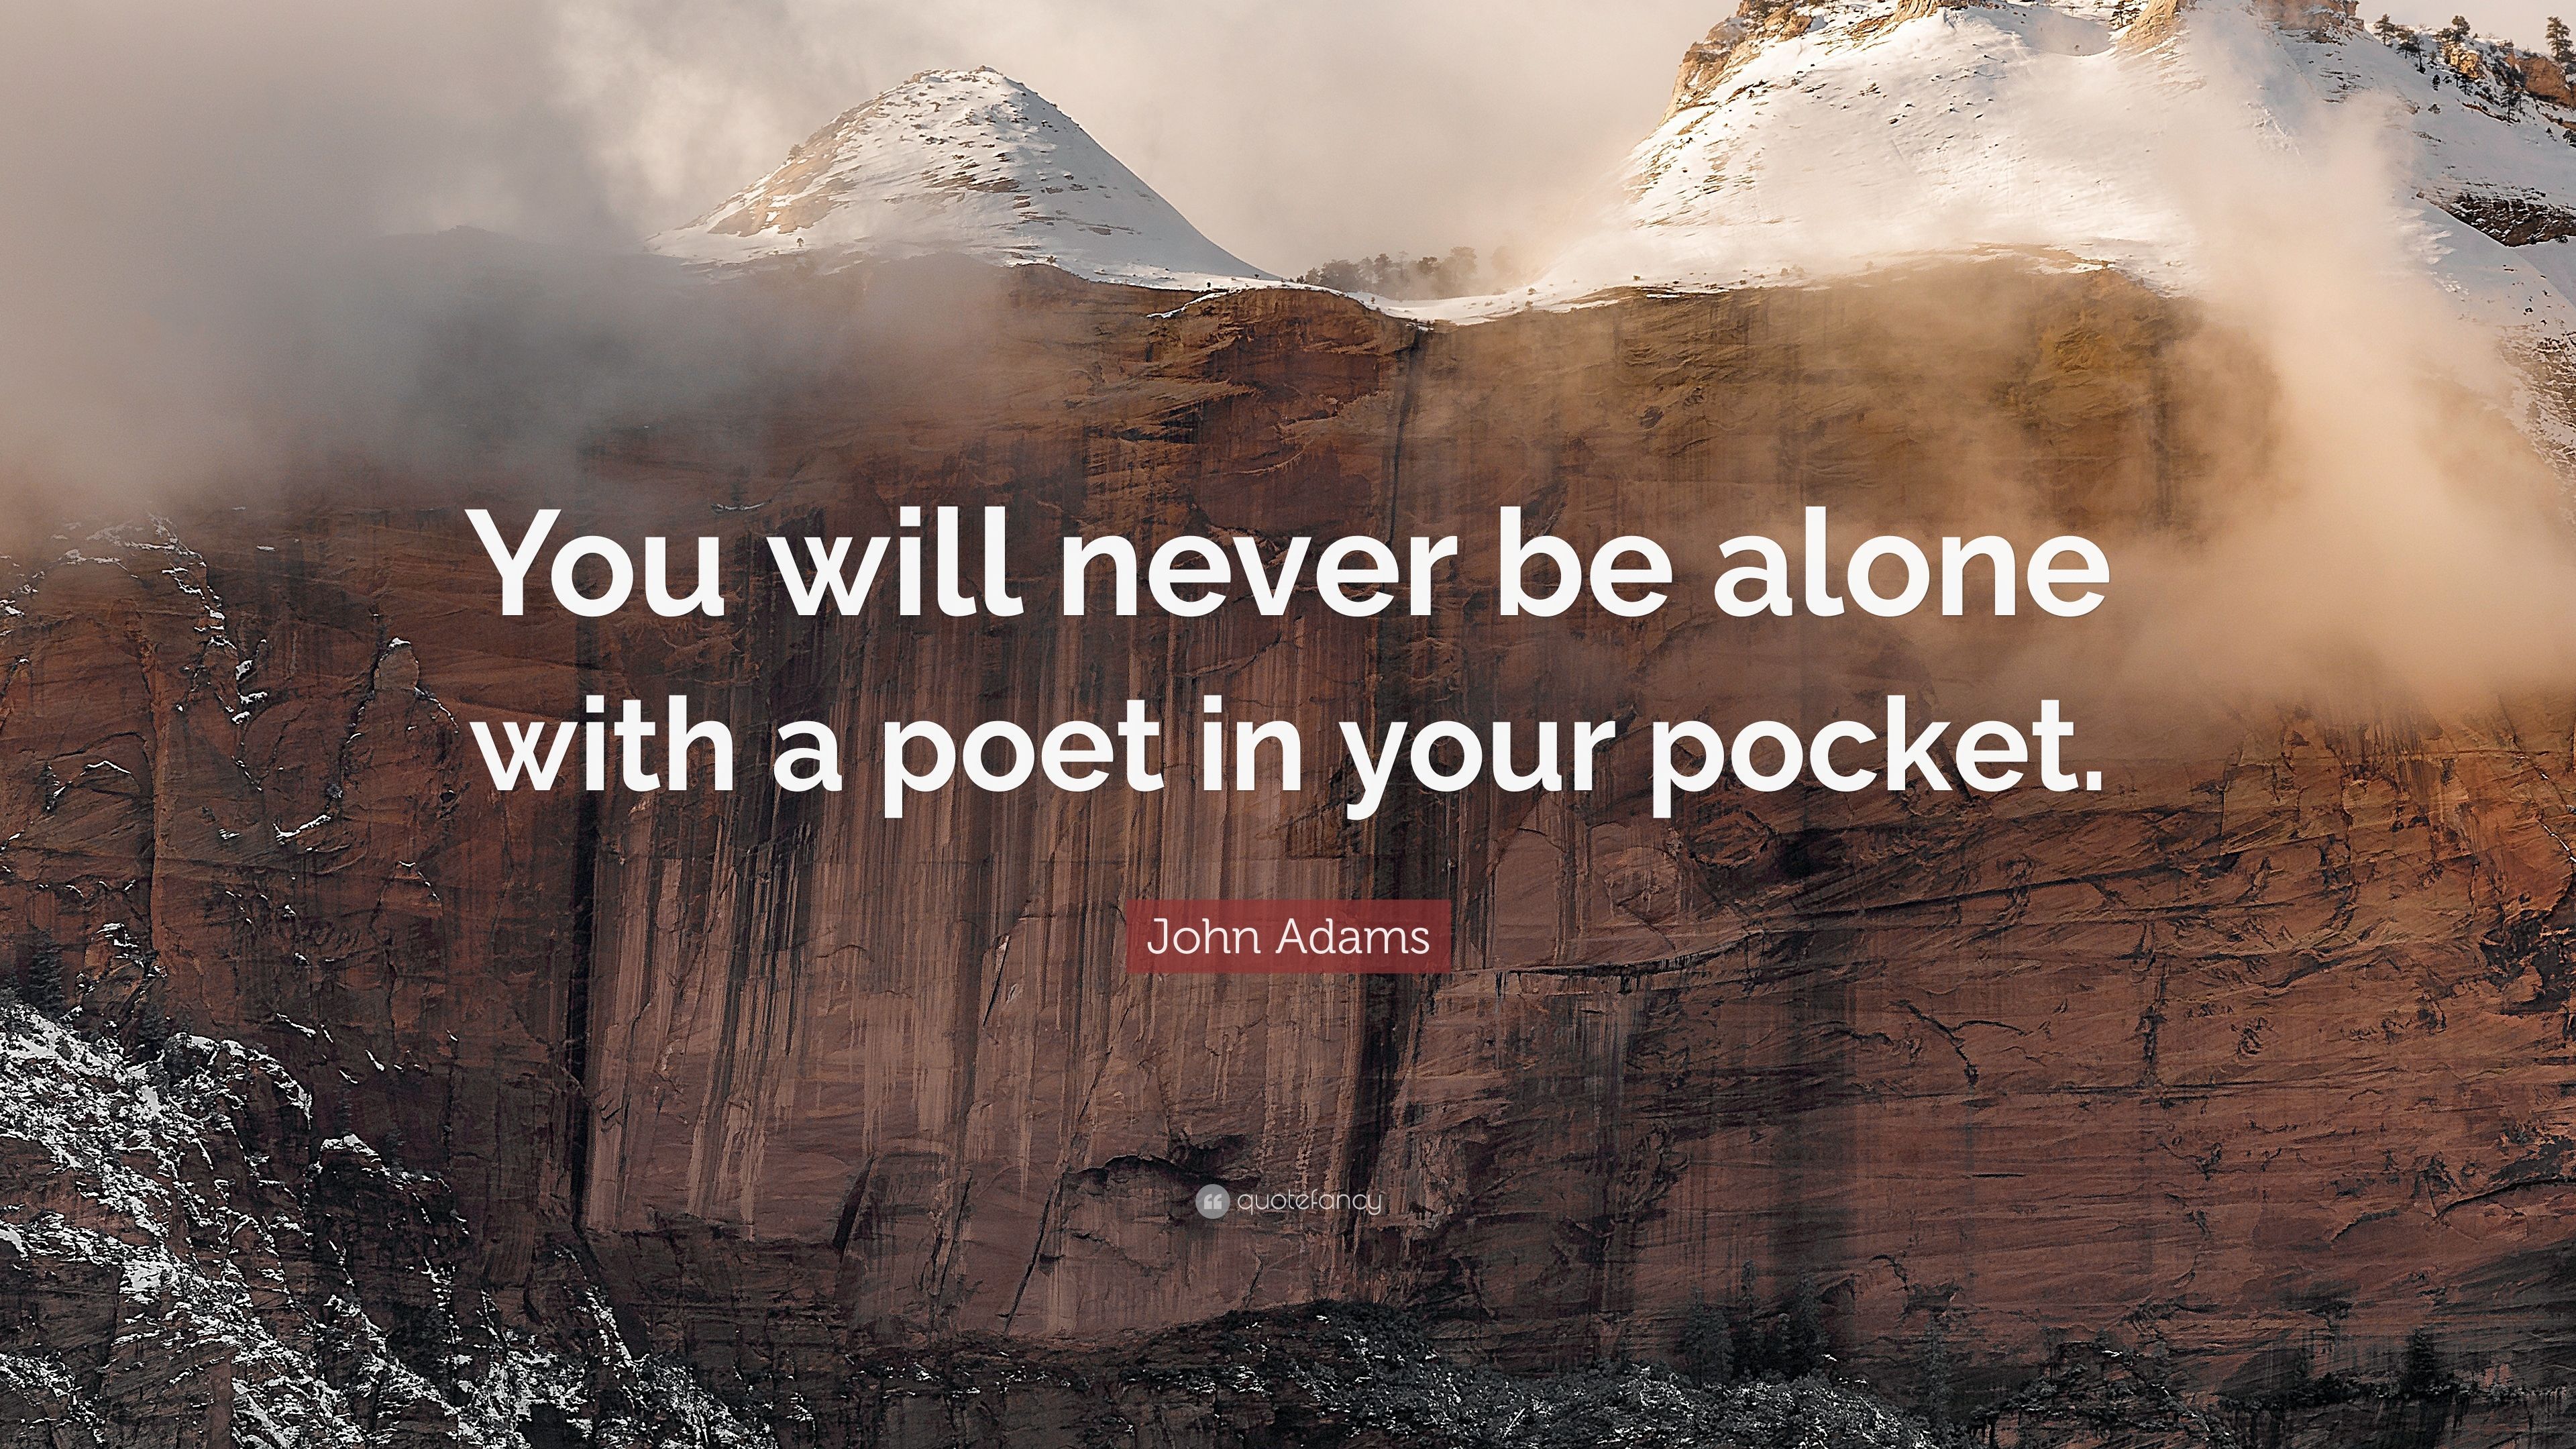 John Adams Quote: “You will never be .quotefancy.com